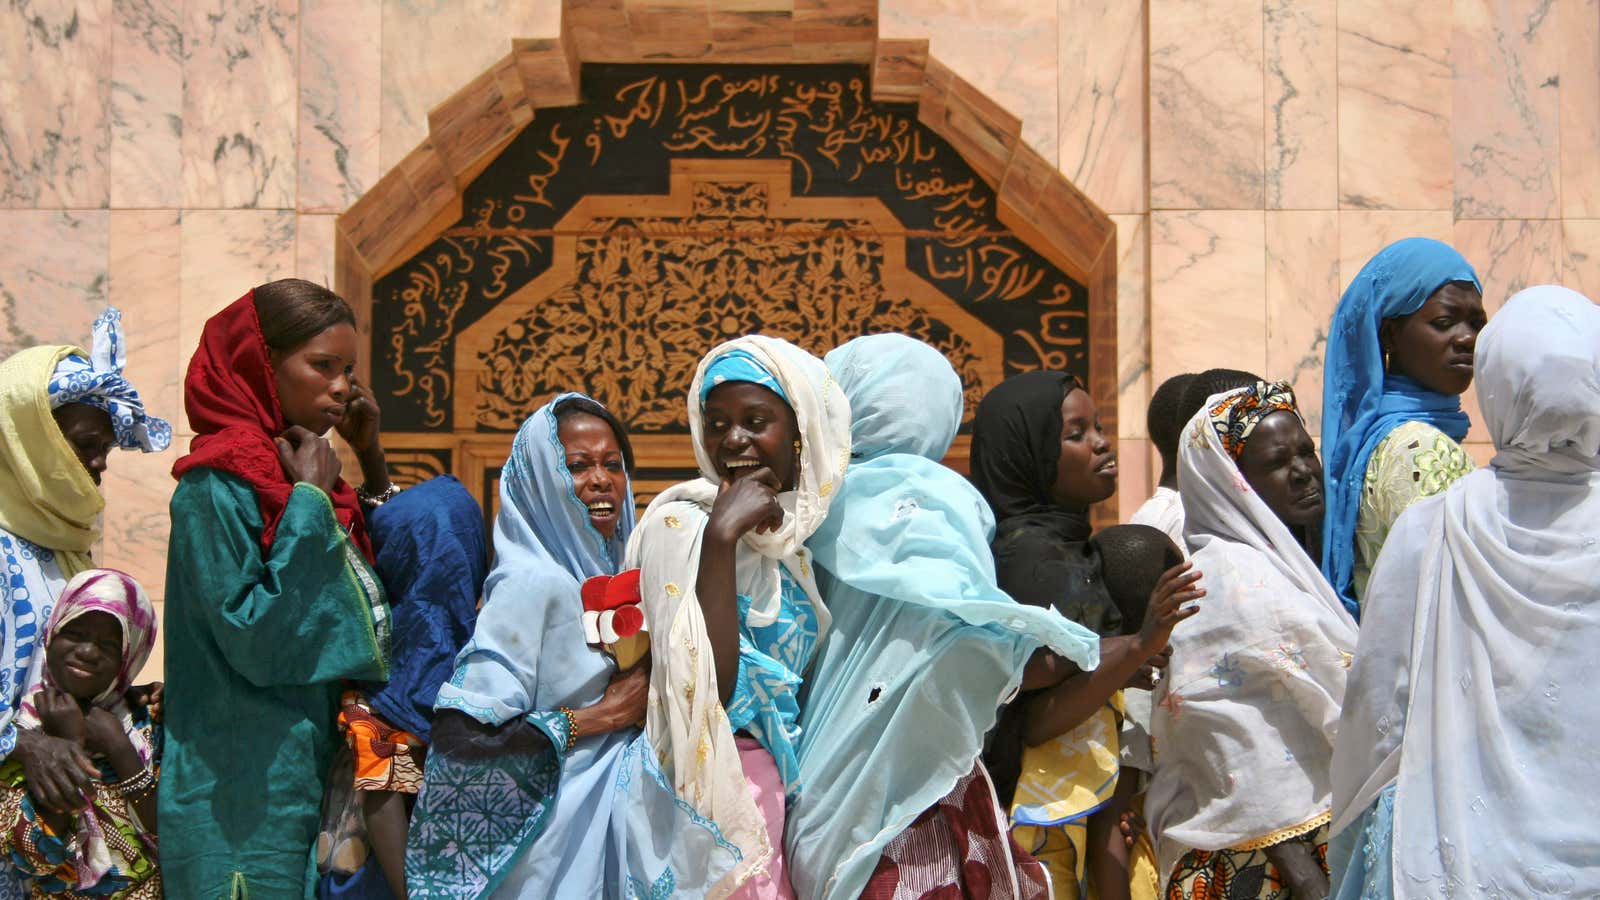 Pilgrims line up to enter the tomb of Cheikh Amadou Bamba, founder of the Mouride brotherhood, in Touba.